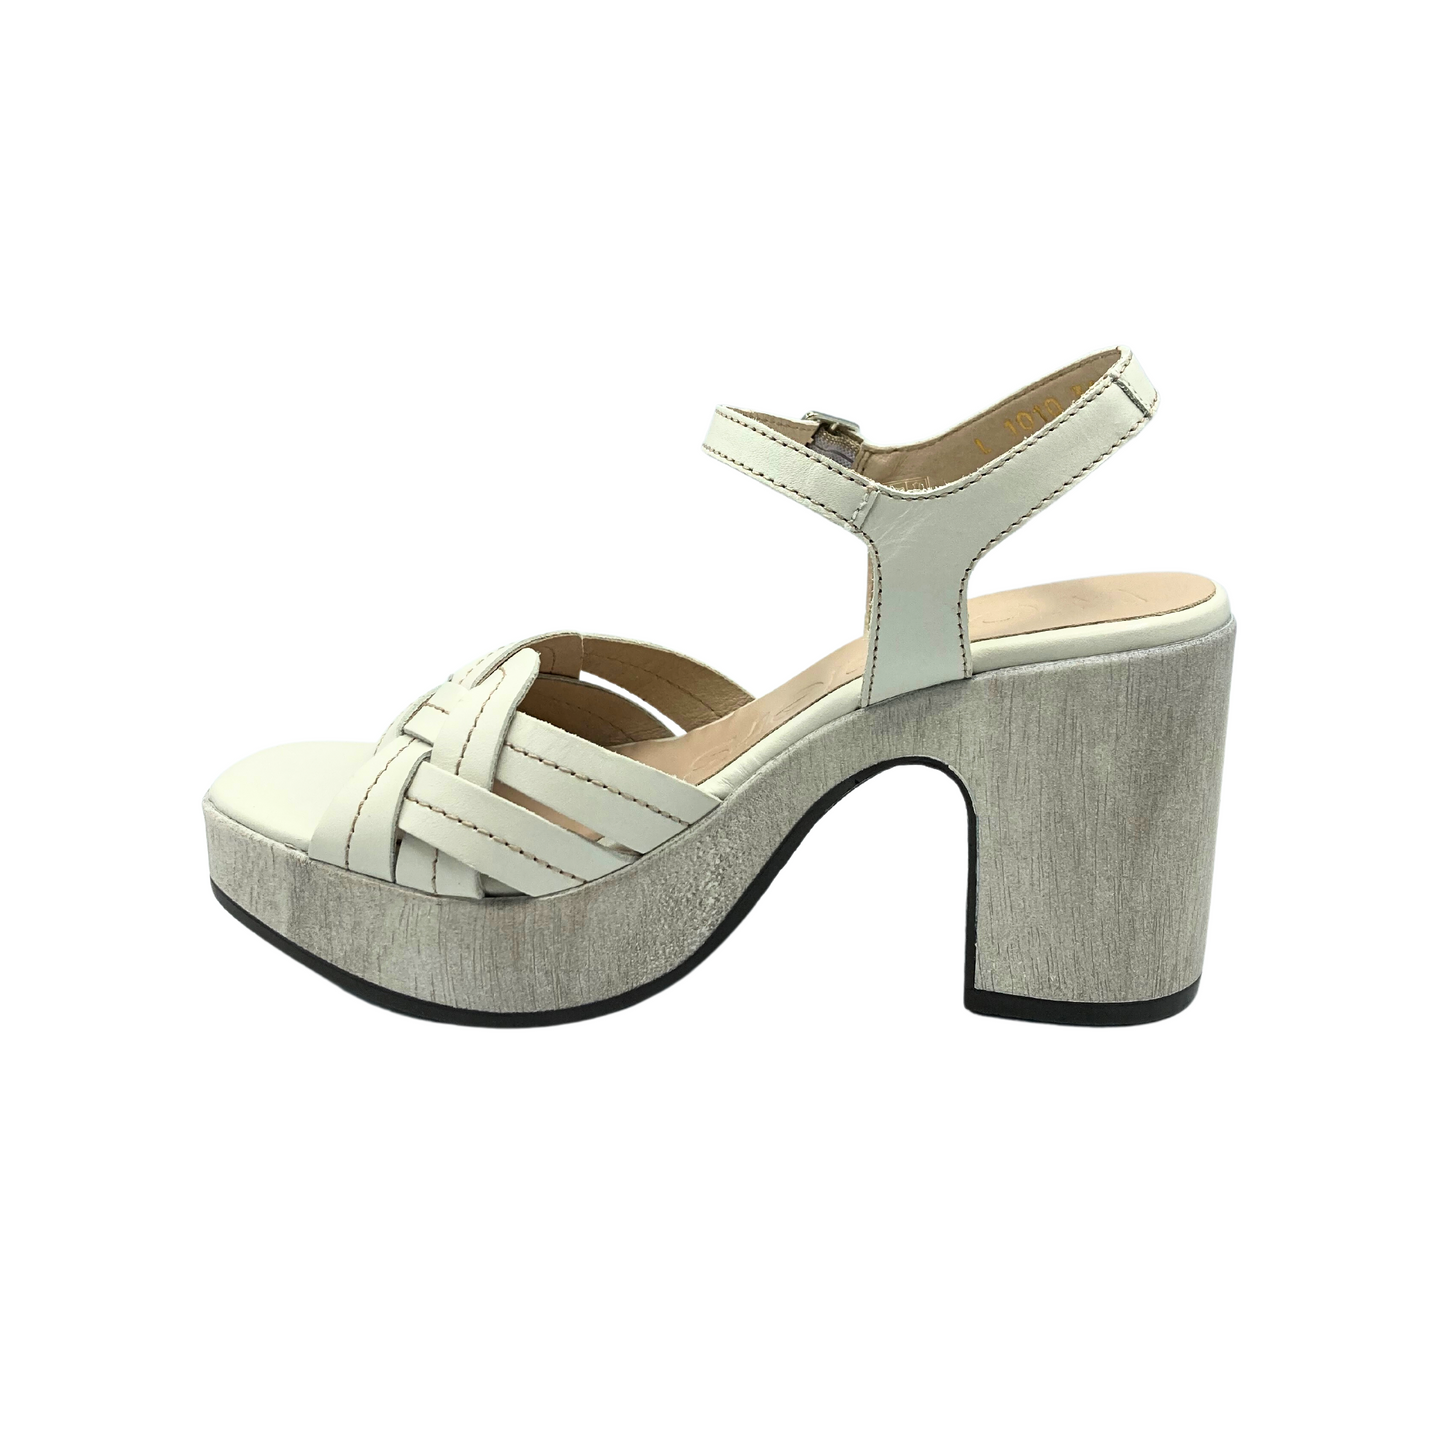 Inside view of a platform sandal.  Creamy white leather upper is woven at the front and offers great coverage at the forefoot.  Ankle and heel strap are attached with an adjustable buckle